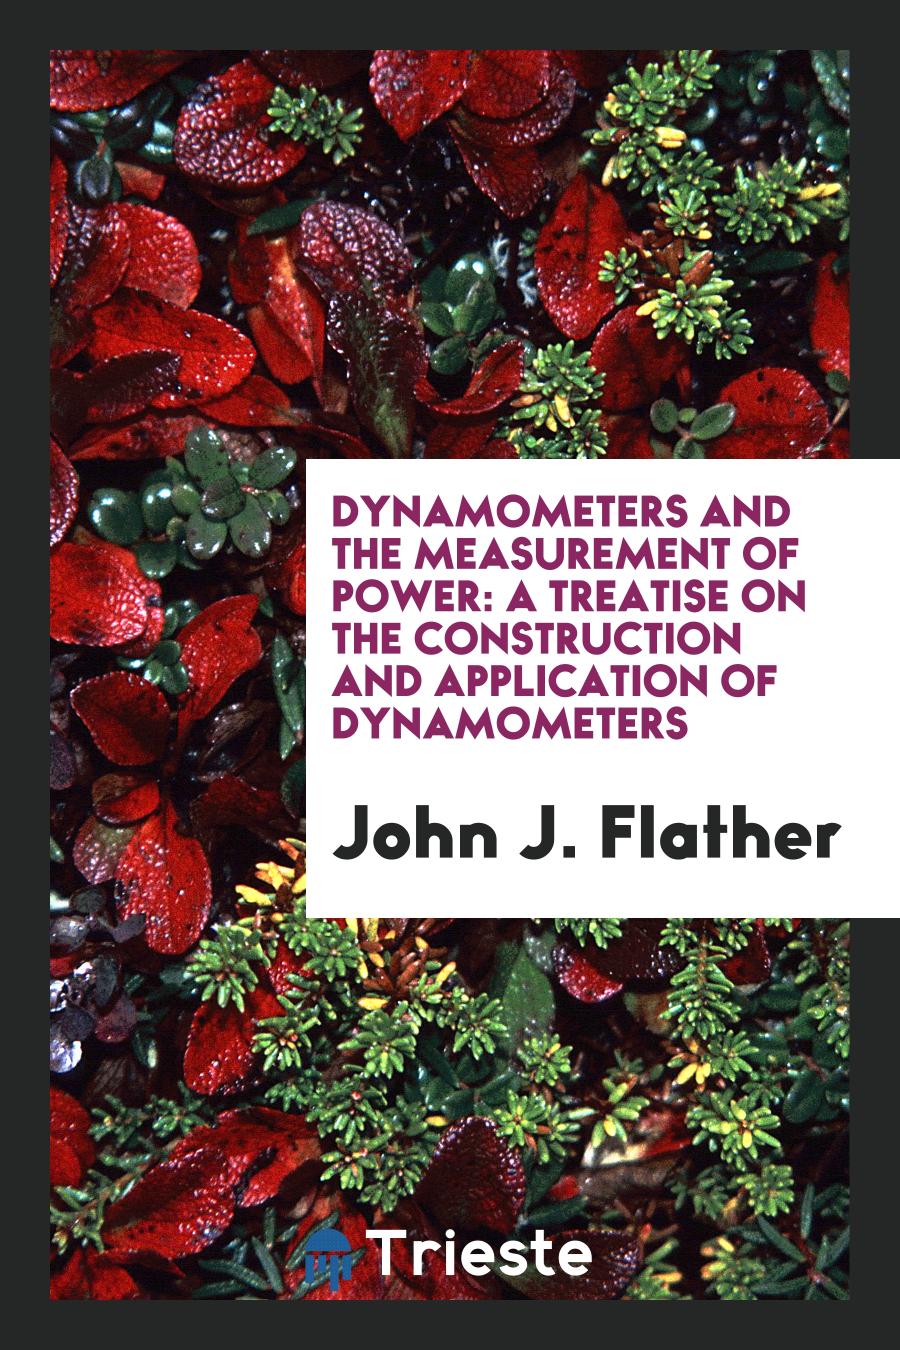 Dynamometers and the Measurement of Power: A Treatise on the Construction and Application of Dynamometers